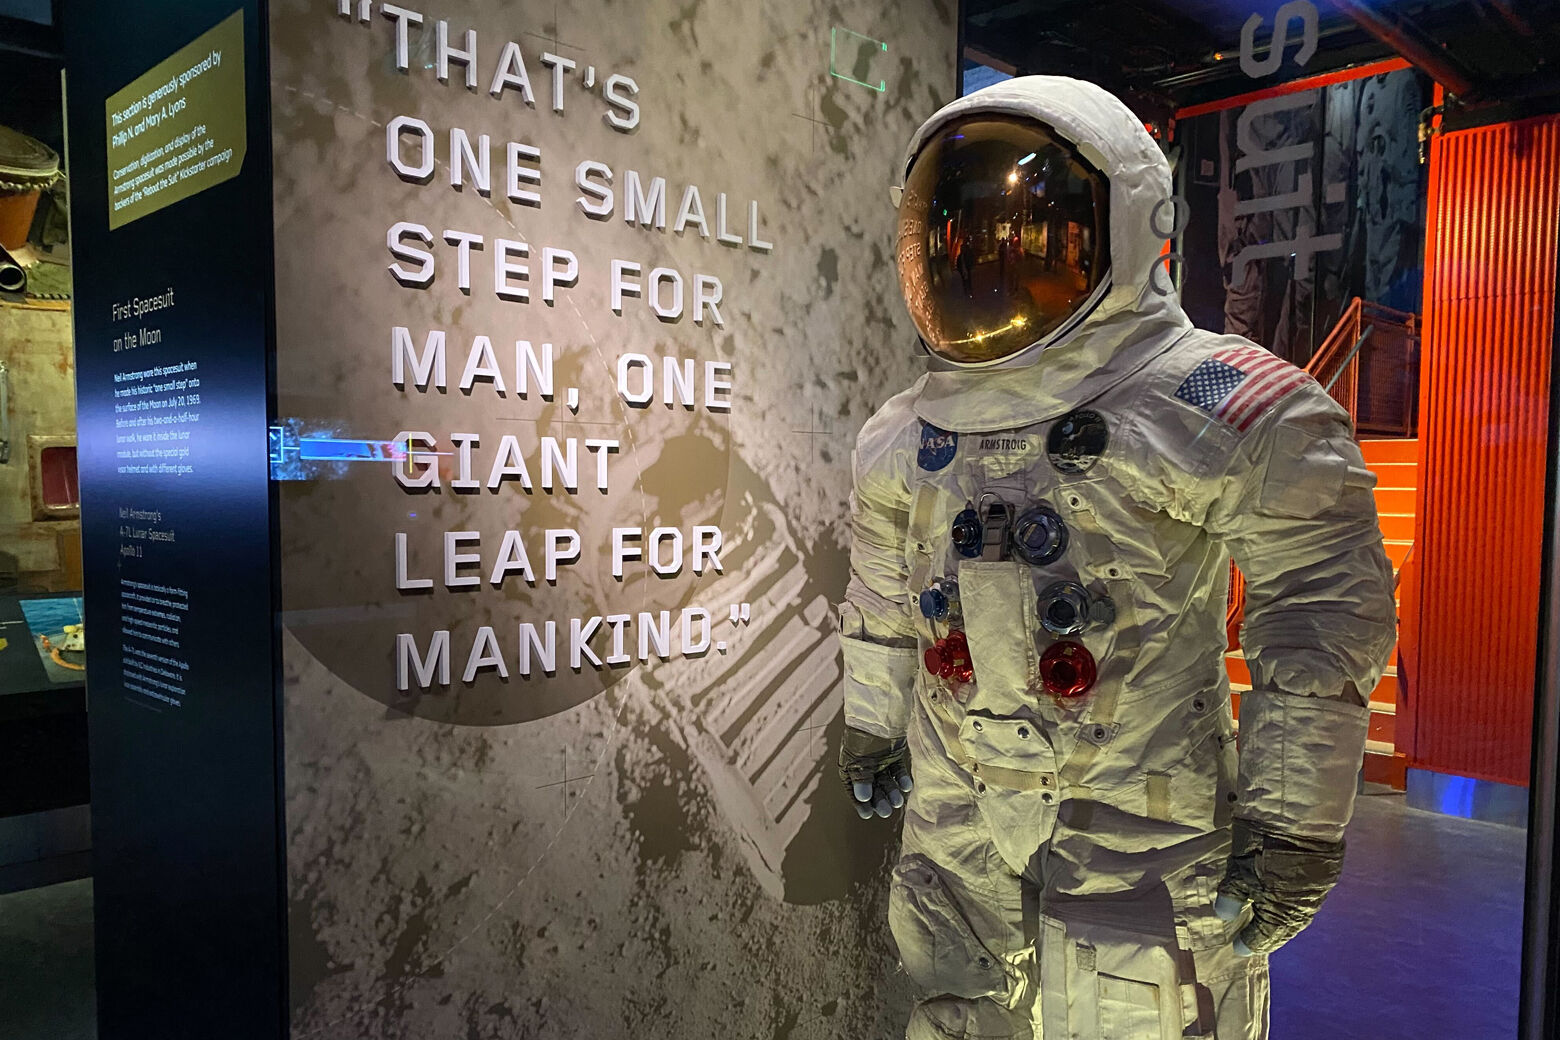 <p>Some artifacts are on display for the first time in decades.</p>
<p>“This is a totally new imagining of the moon gallery,” said Michael Neufeld, the senior curator of space history at the museum. “The old moon gallery was done just after Apollo — we assumed everyone knew what was in there and had happened in Apollo. This gallery presents it for a public who grew up long after Apollo was over, wasn’t alive for the landing on the moon. We have to tell everybody the whole story of Apollo.”</p>
“>2/8</p>



<p>Neil Armstrong’s astronaut suit on display at the Air and Space Museum.</p>



<p>Some artifacts are on display for the first time in decades.</p>



<p>“This is a totally new imagining of the moon gallery,” said Michael Neufeld, the senior curator of space history at the museum. “The old moon gallery was done just after Apollo — we assumed everyone knew what was in there and had happened in Apollo. This gallery presents it for a public who grew up long after Apollo was over, wasn’t alive for the landing on the moon. We have to tell everybody the whole story of Apollo.”</p>



<p><img decoding=